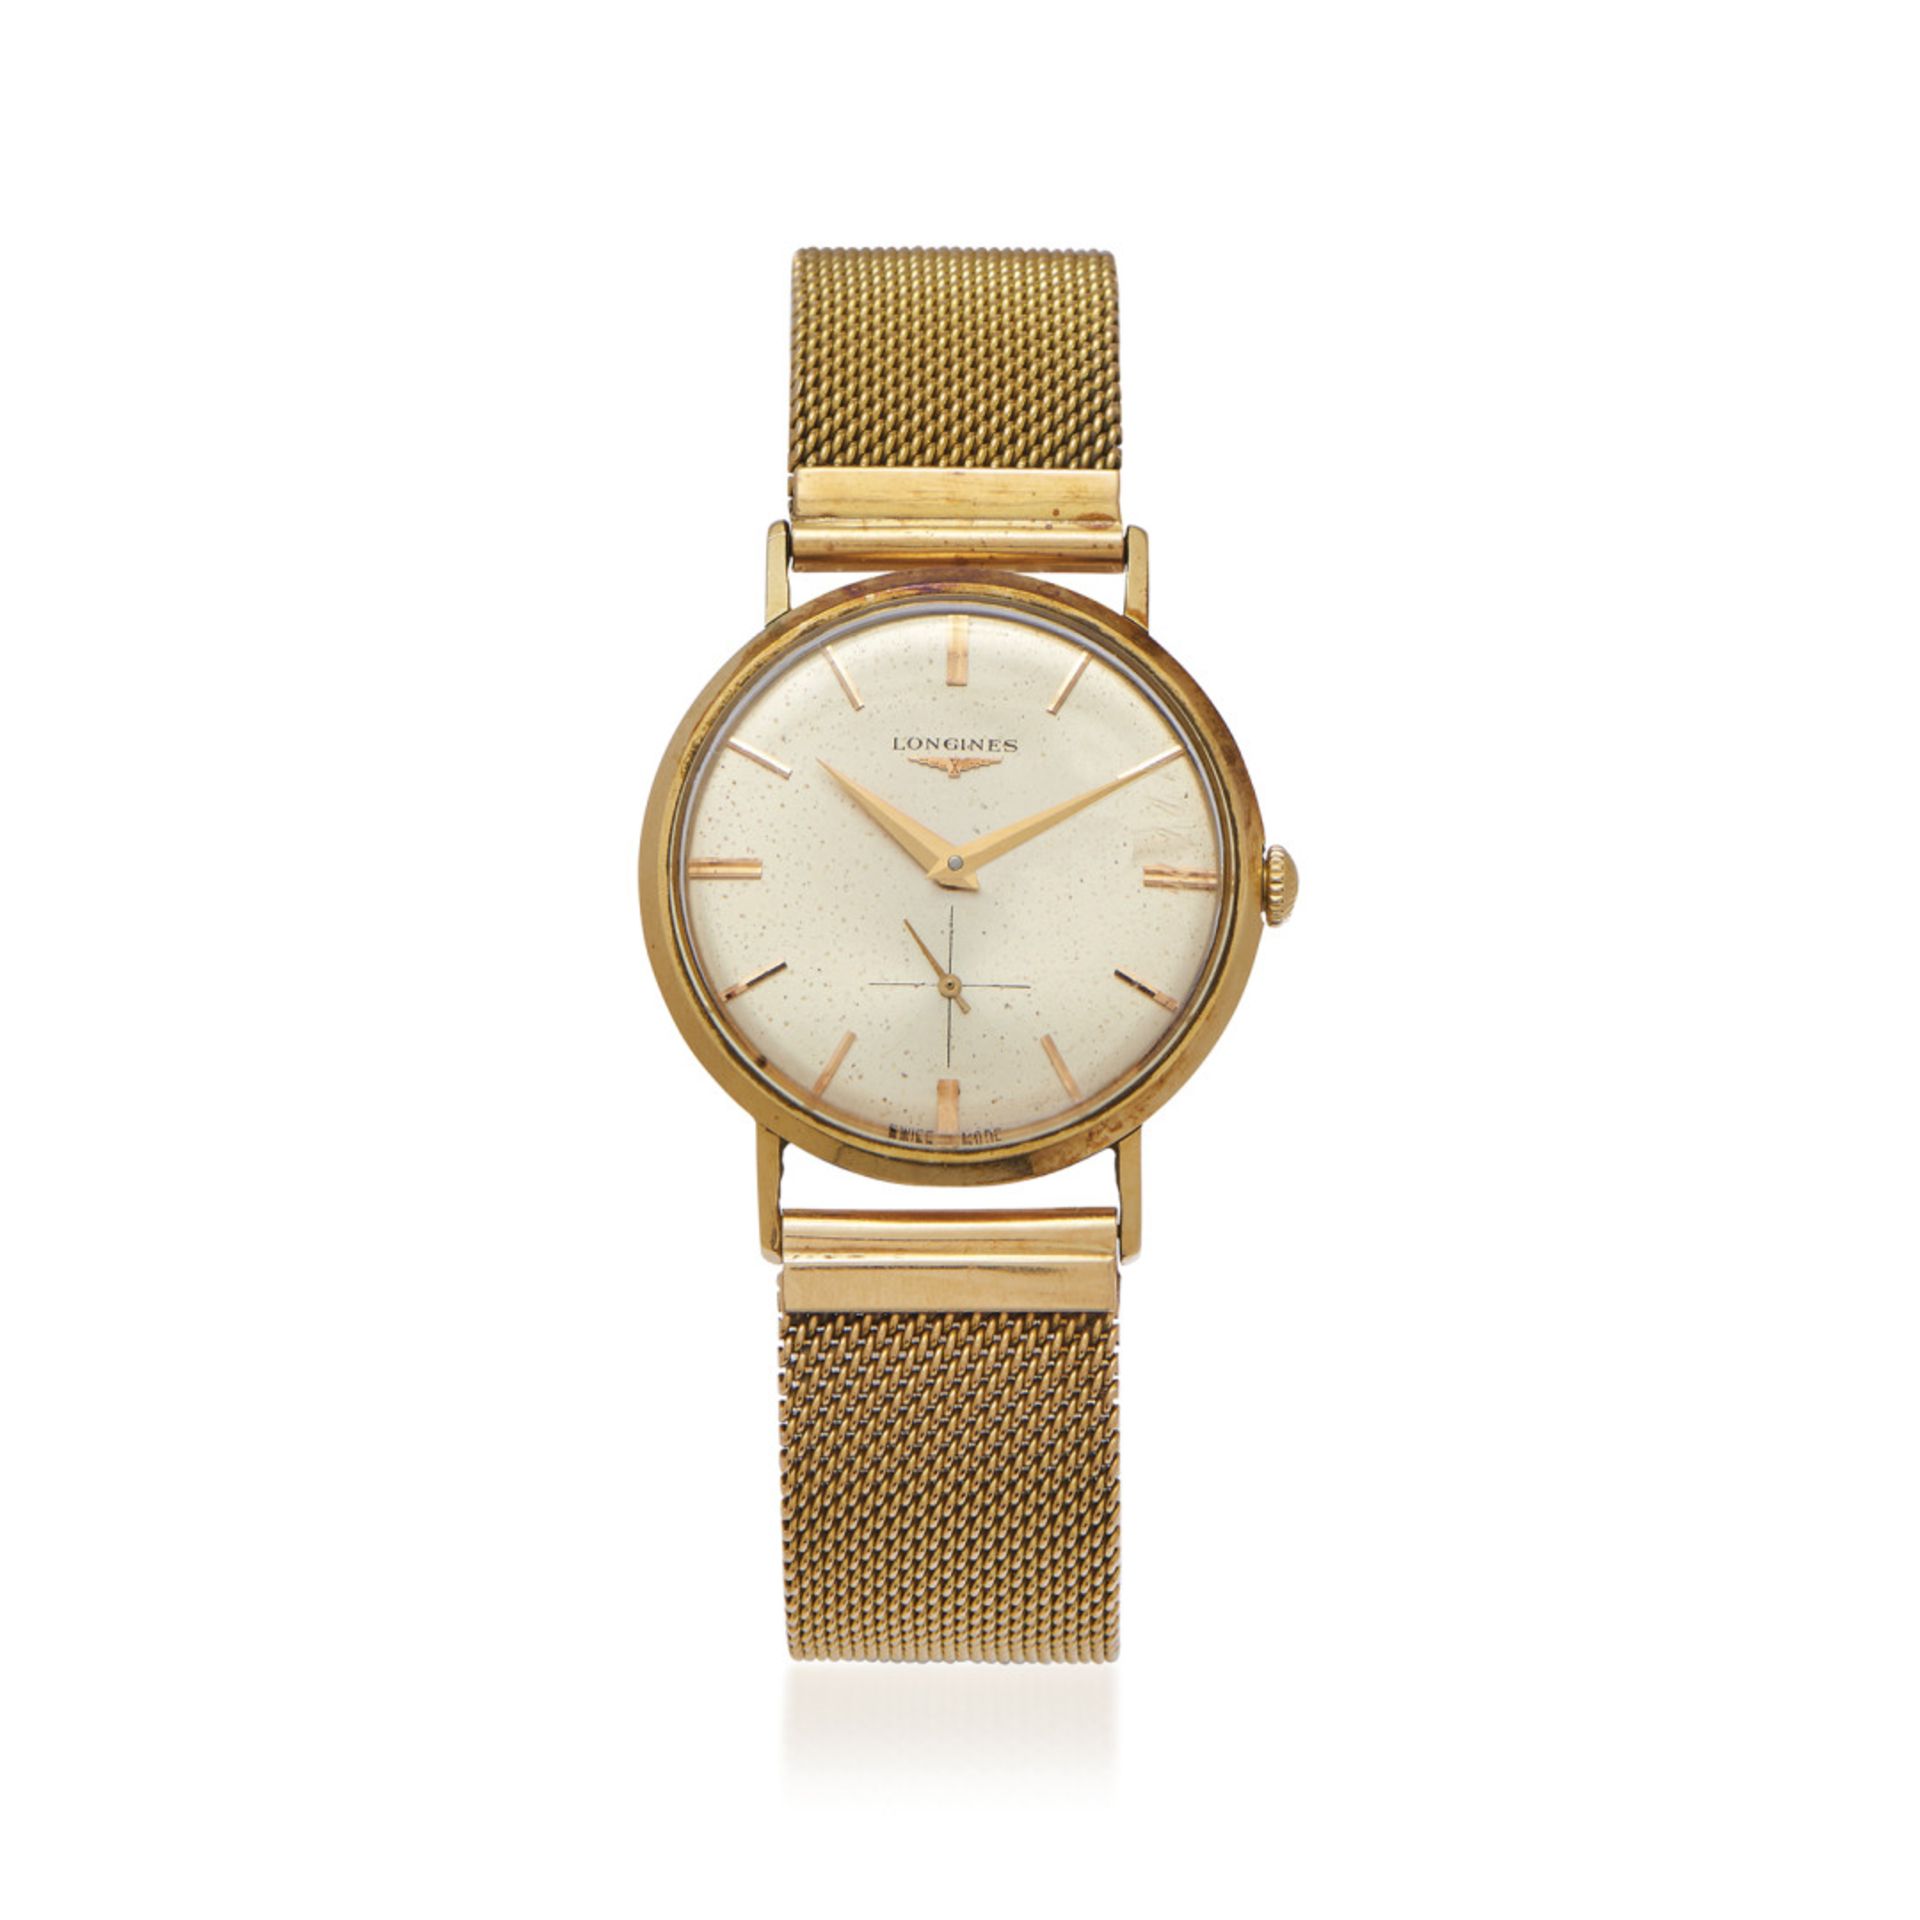 LONGINES IN GOLD, 60s - LONGINES IN GOLD, 60S Case: signed, n. 244 6982 13, two-body in 18K pink